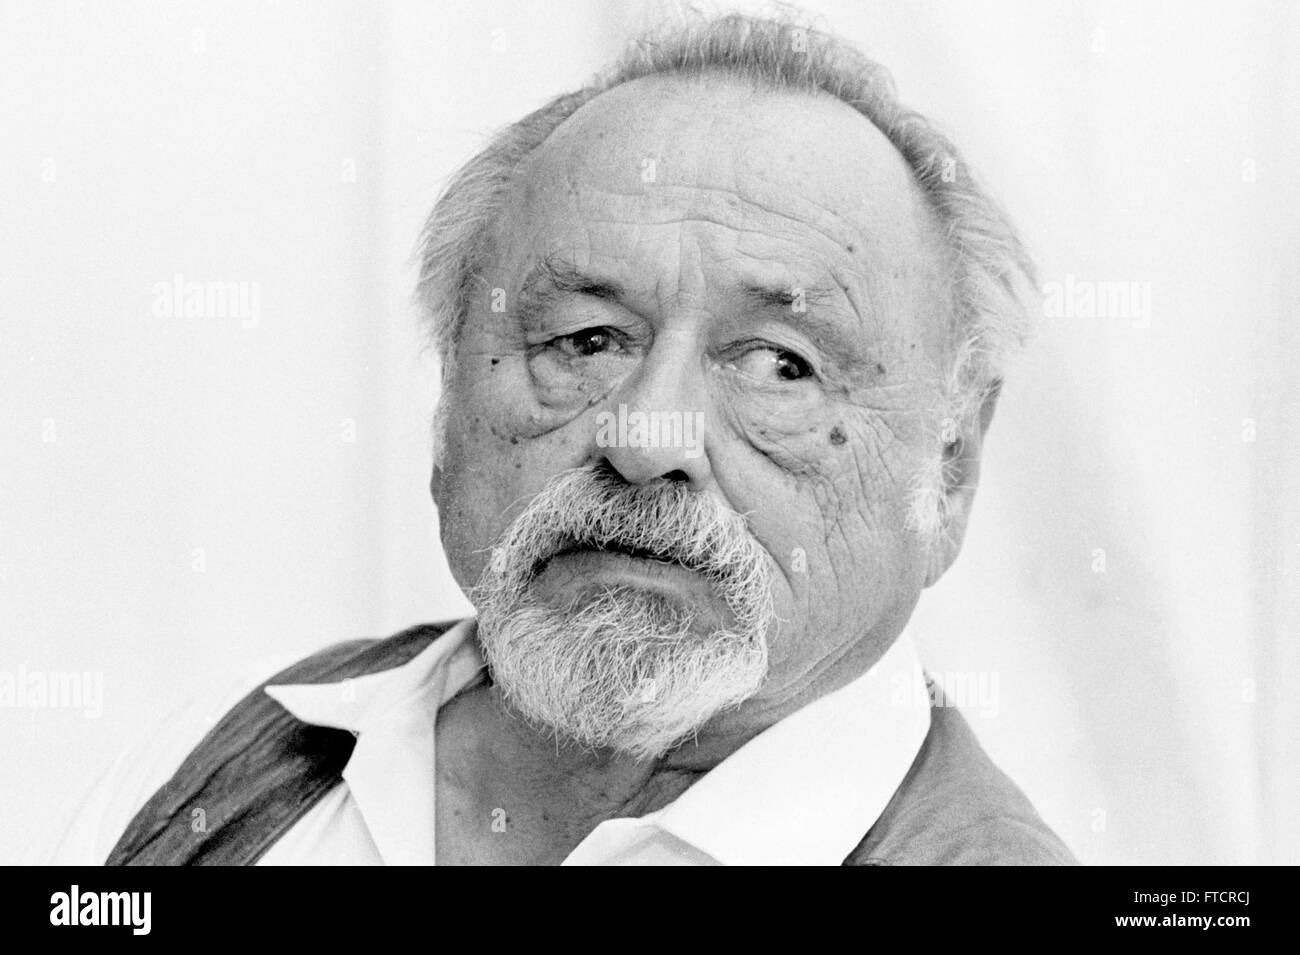 FILE PIC: Taken in 2007. Jim Harrison distinguished American poet and writer (December 11, 1937-March 26, 2016) died Saturday March 26 at his home in Patagonia, Arizona at the age of 78. He was born in Grayling, Michigan and was a rugged outdoors man all his life. Jim Harrison published 14 books of poetry and more than 20 books of fiction, memoir and essays. He has a strong intellectual following in France. He was elected to the American Academy of Arts and Letters in 2007. Credit:  Dorothy Alexander/Alamy Live News Stock Photo